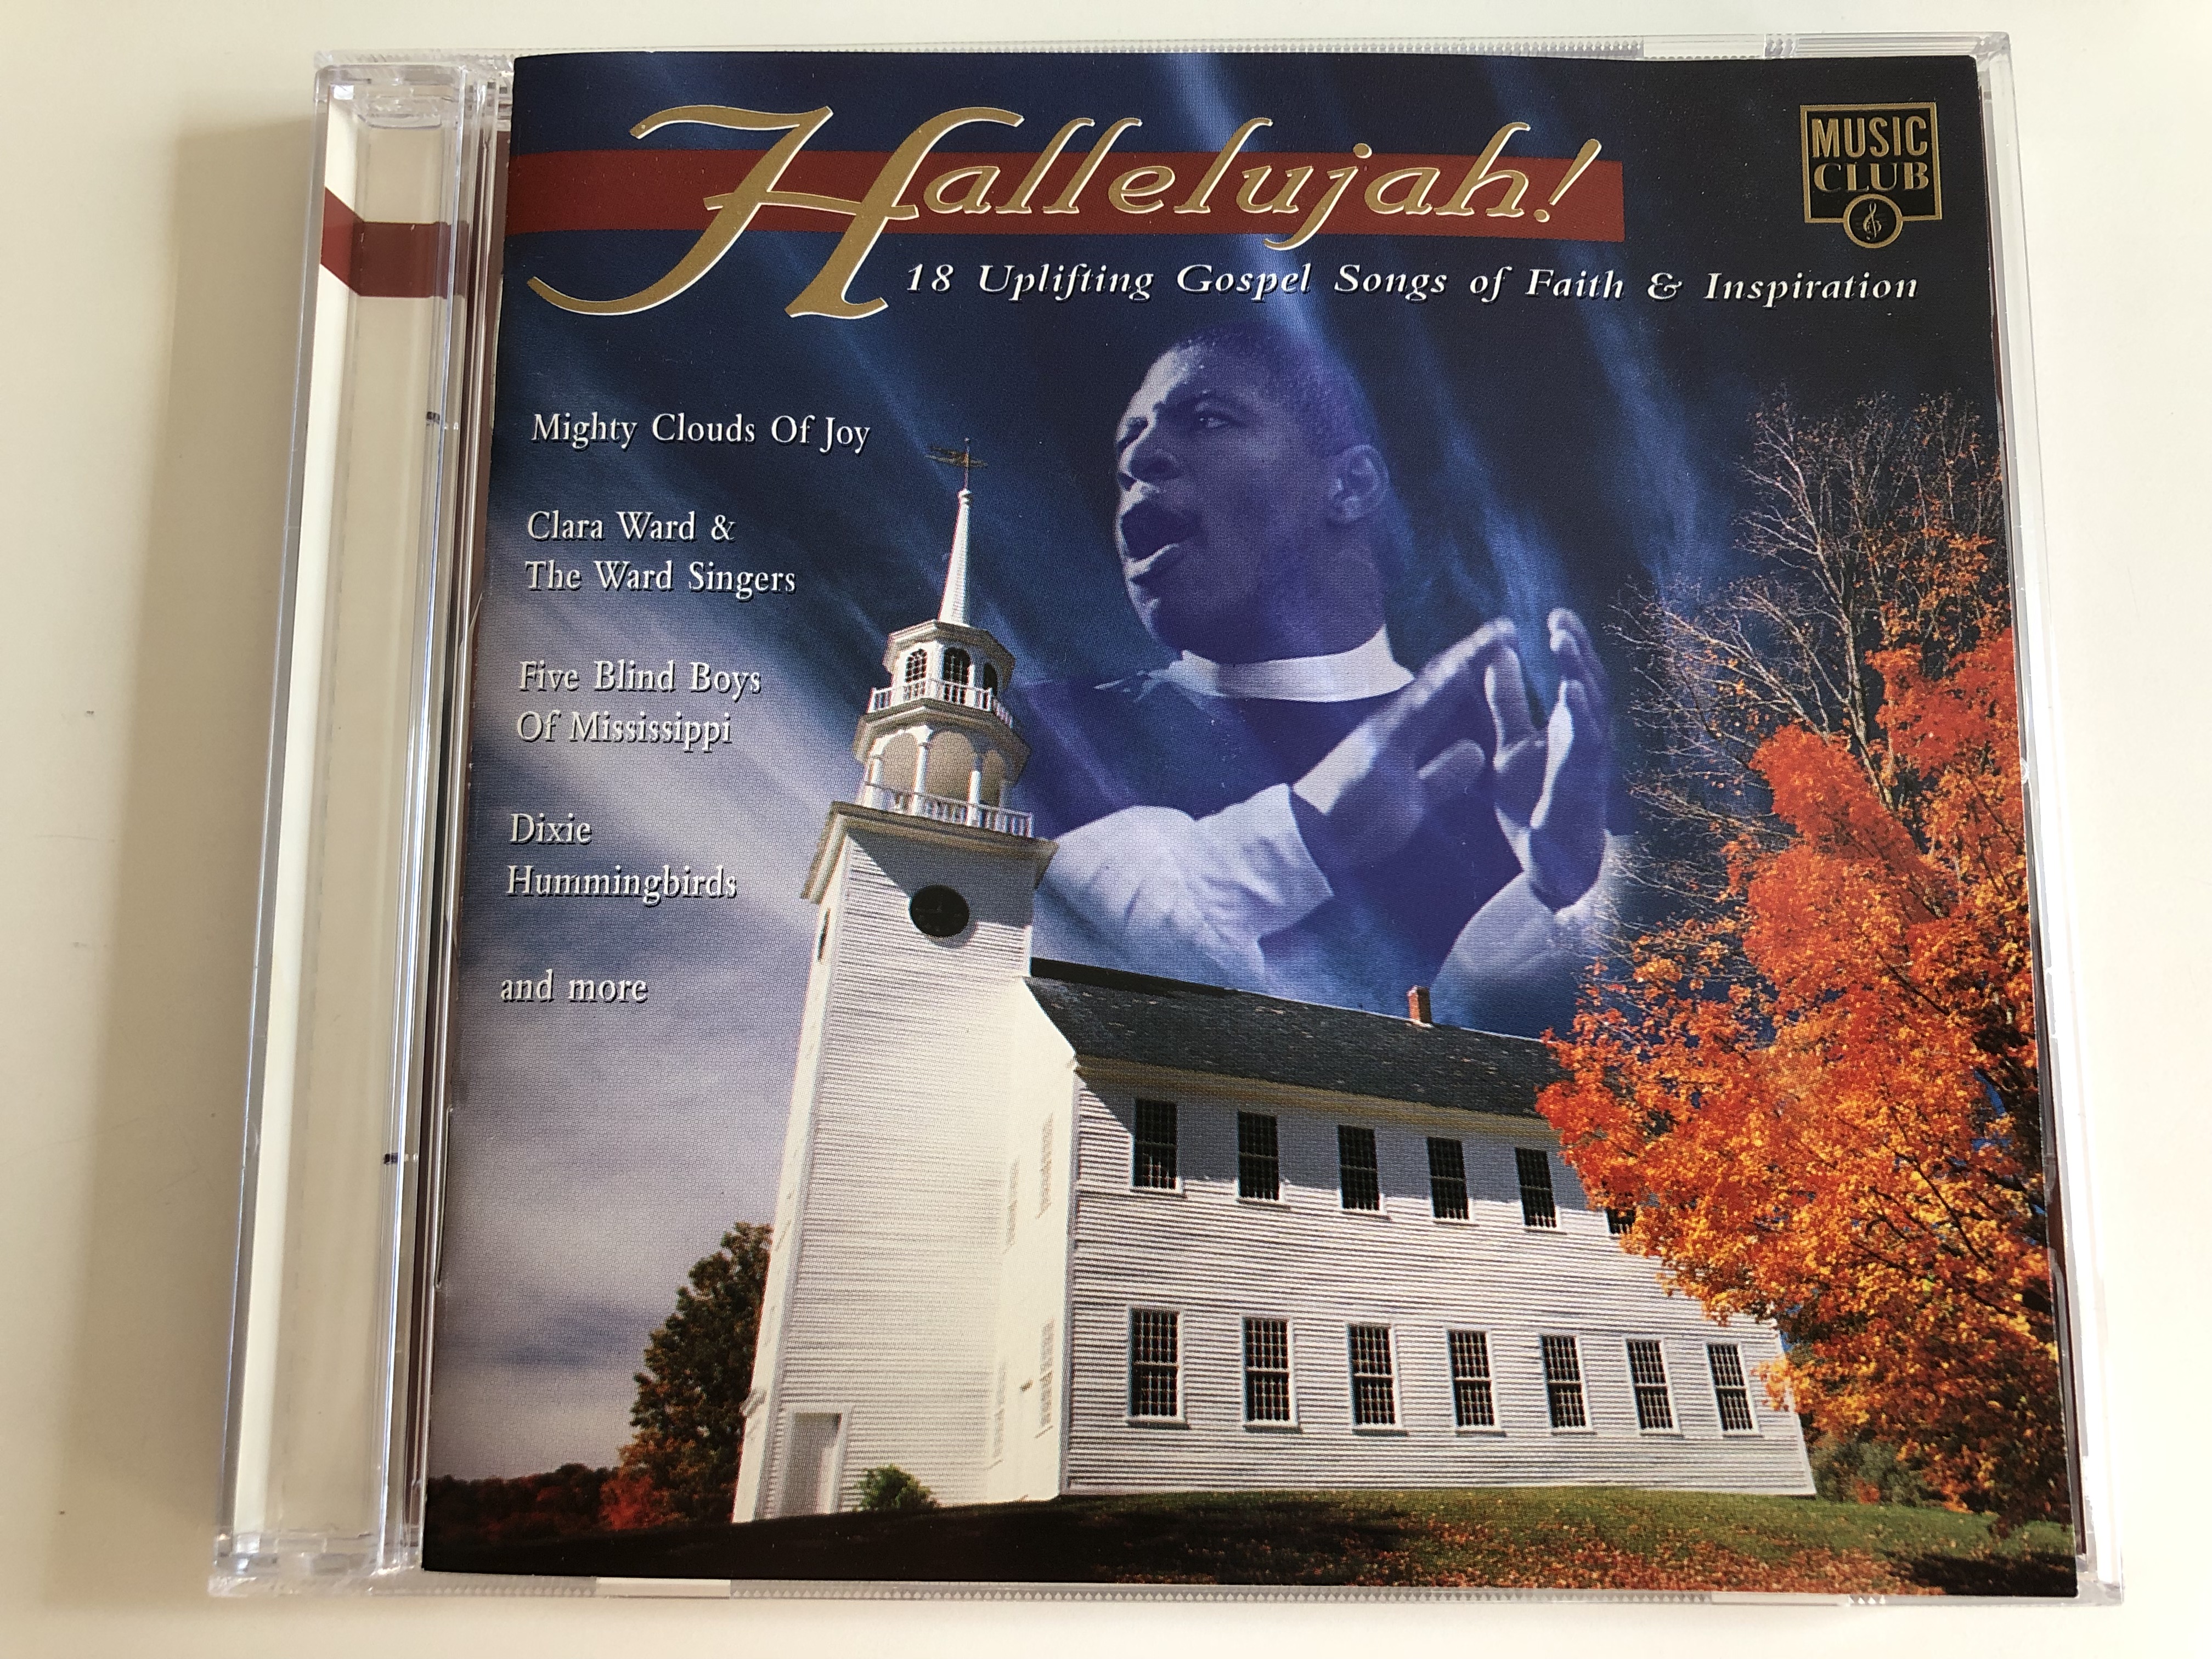 hallelujah-18-uplifting-gospel-songs-of-faith-inspiration-mighty-clouds-of-joy-clara-ward-the-ward-singers-five-blind-boys-of-mississippi-dixie-hummingbirds-and-mor-audio-cd-1997-mccd-298-1-.jpg